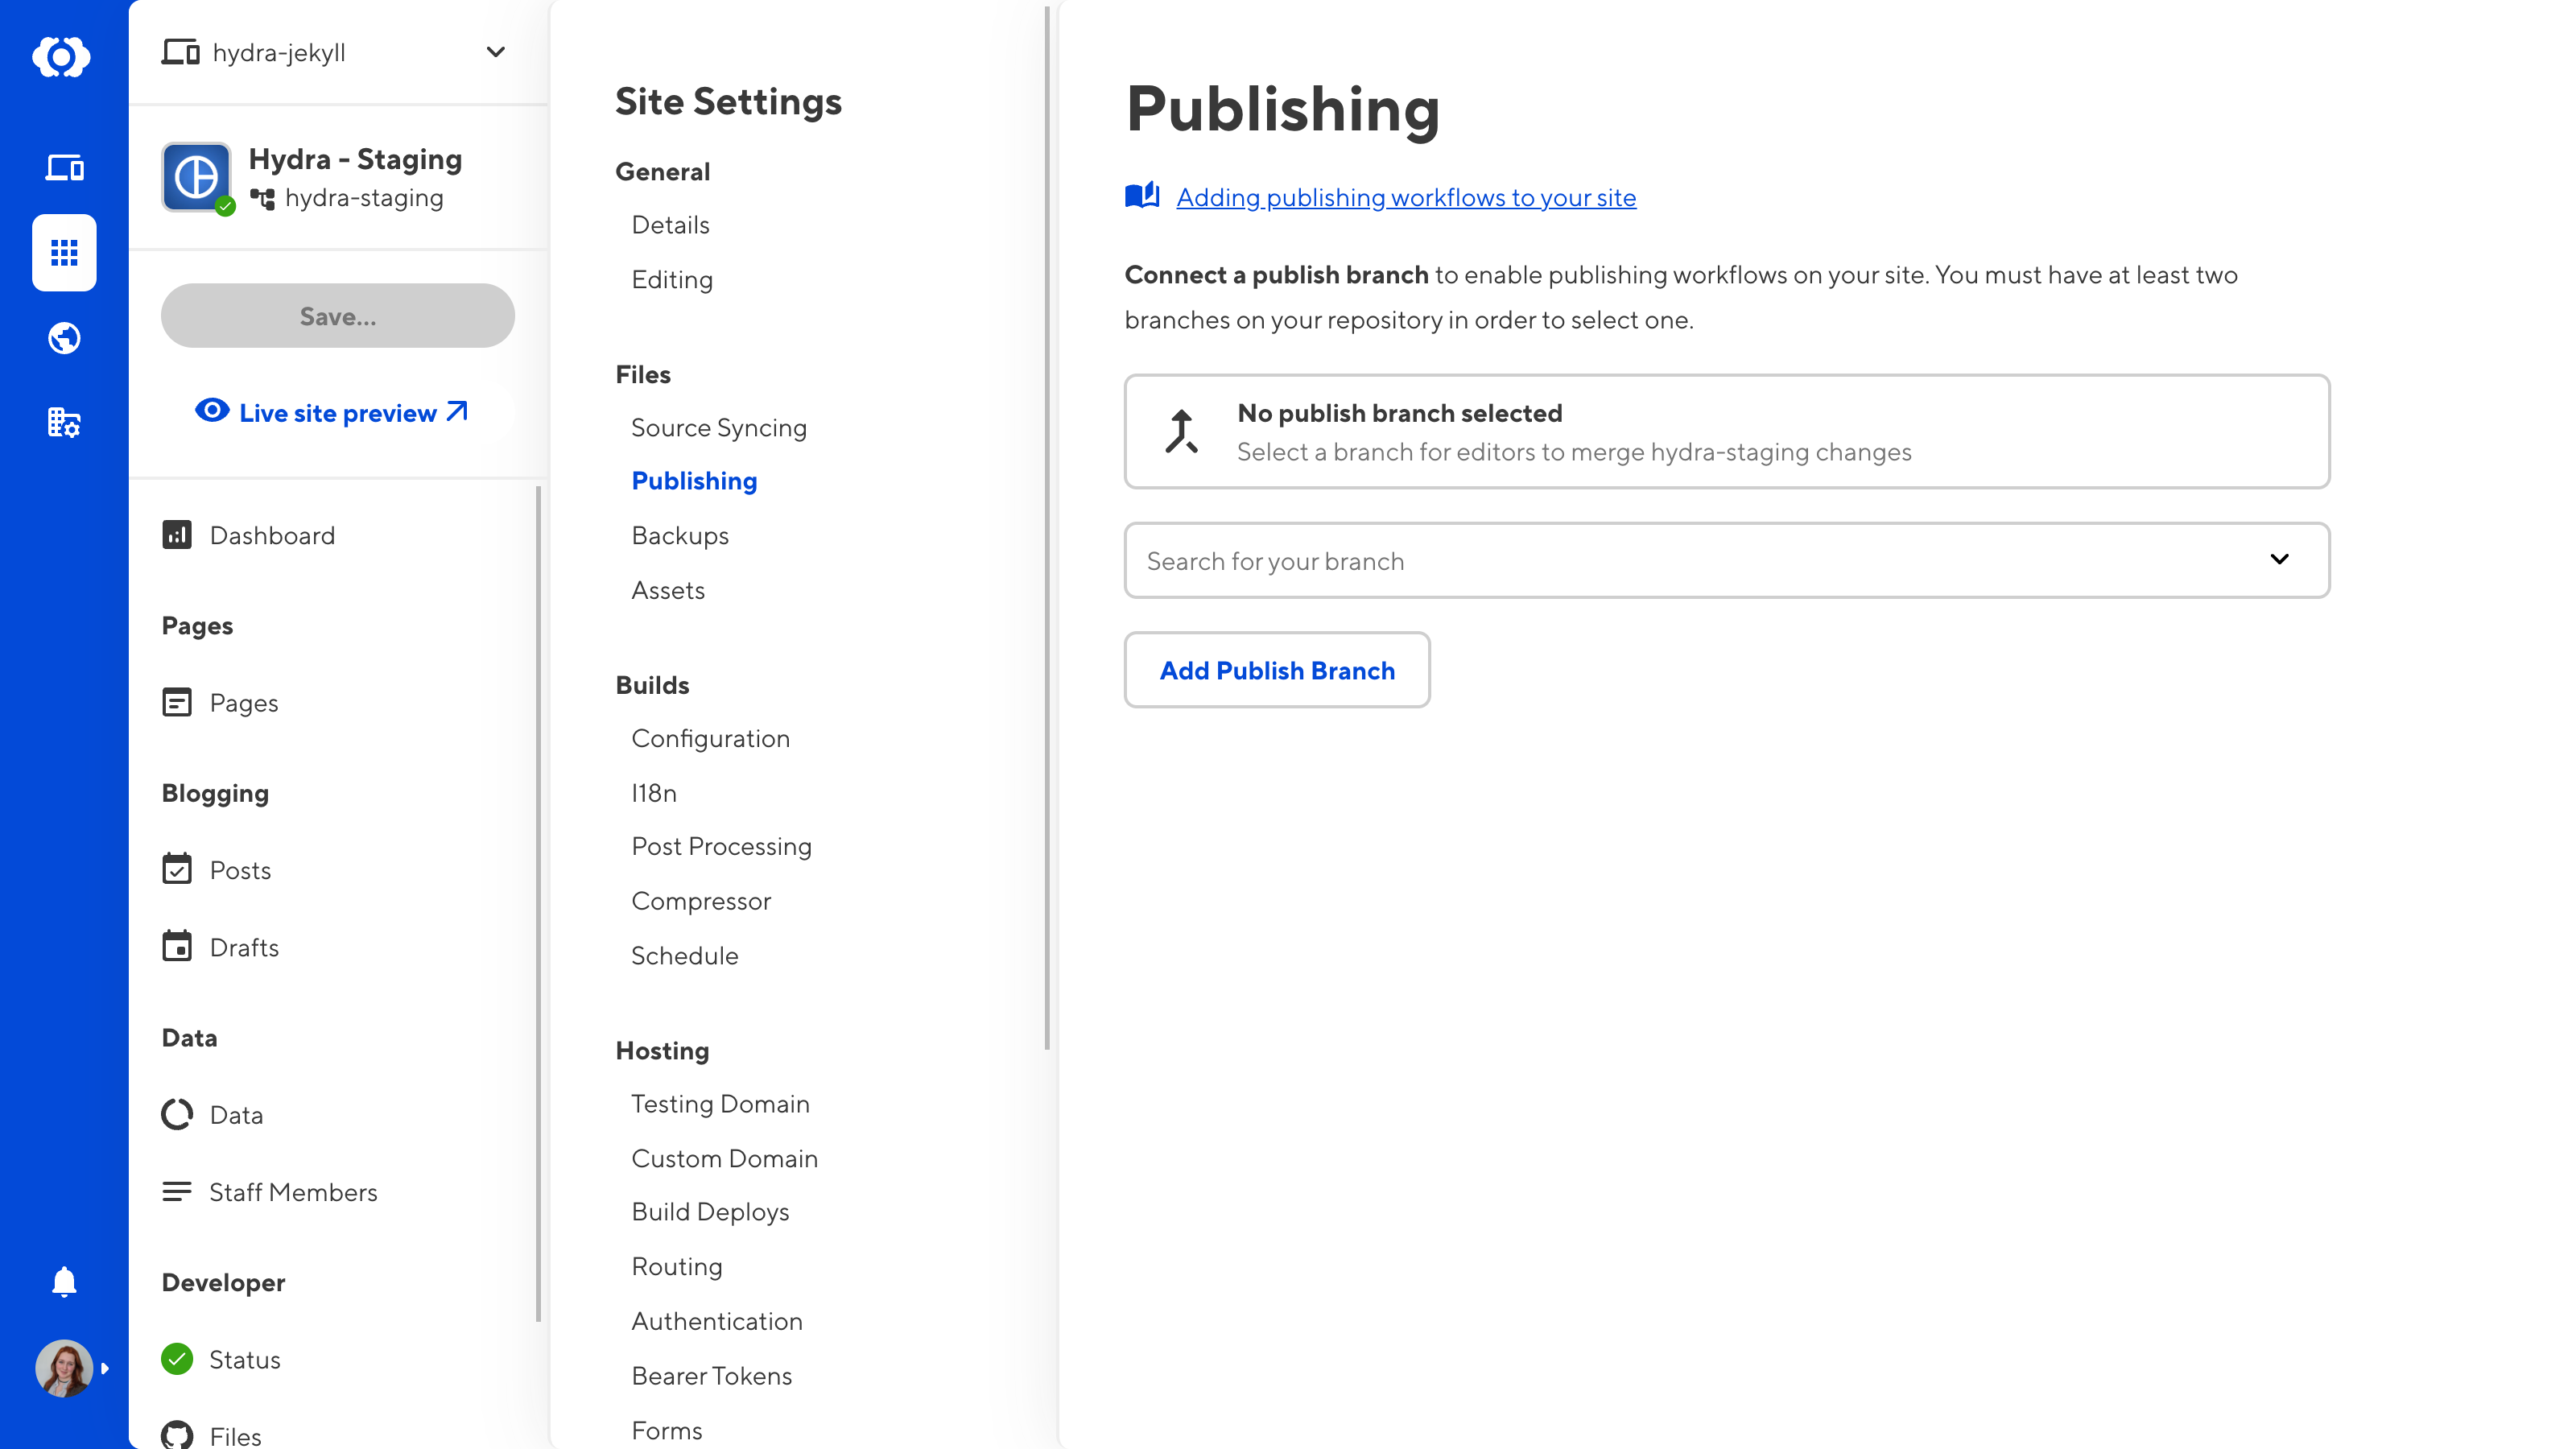 A screenshot of the CloudCannon app shows the Publishing tab on the Site Settings page, with a button to Add Publish Branch.